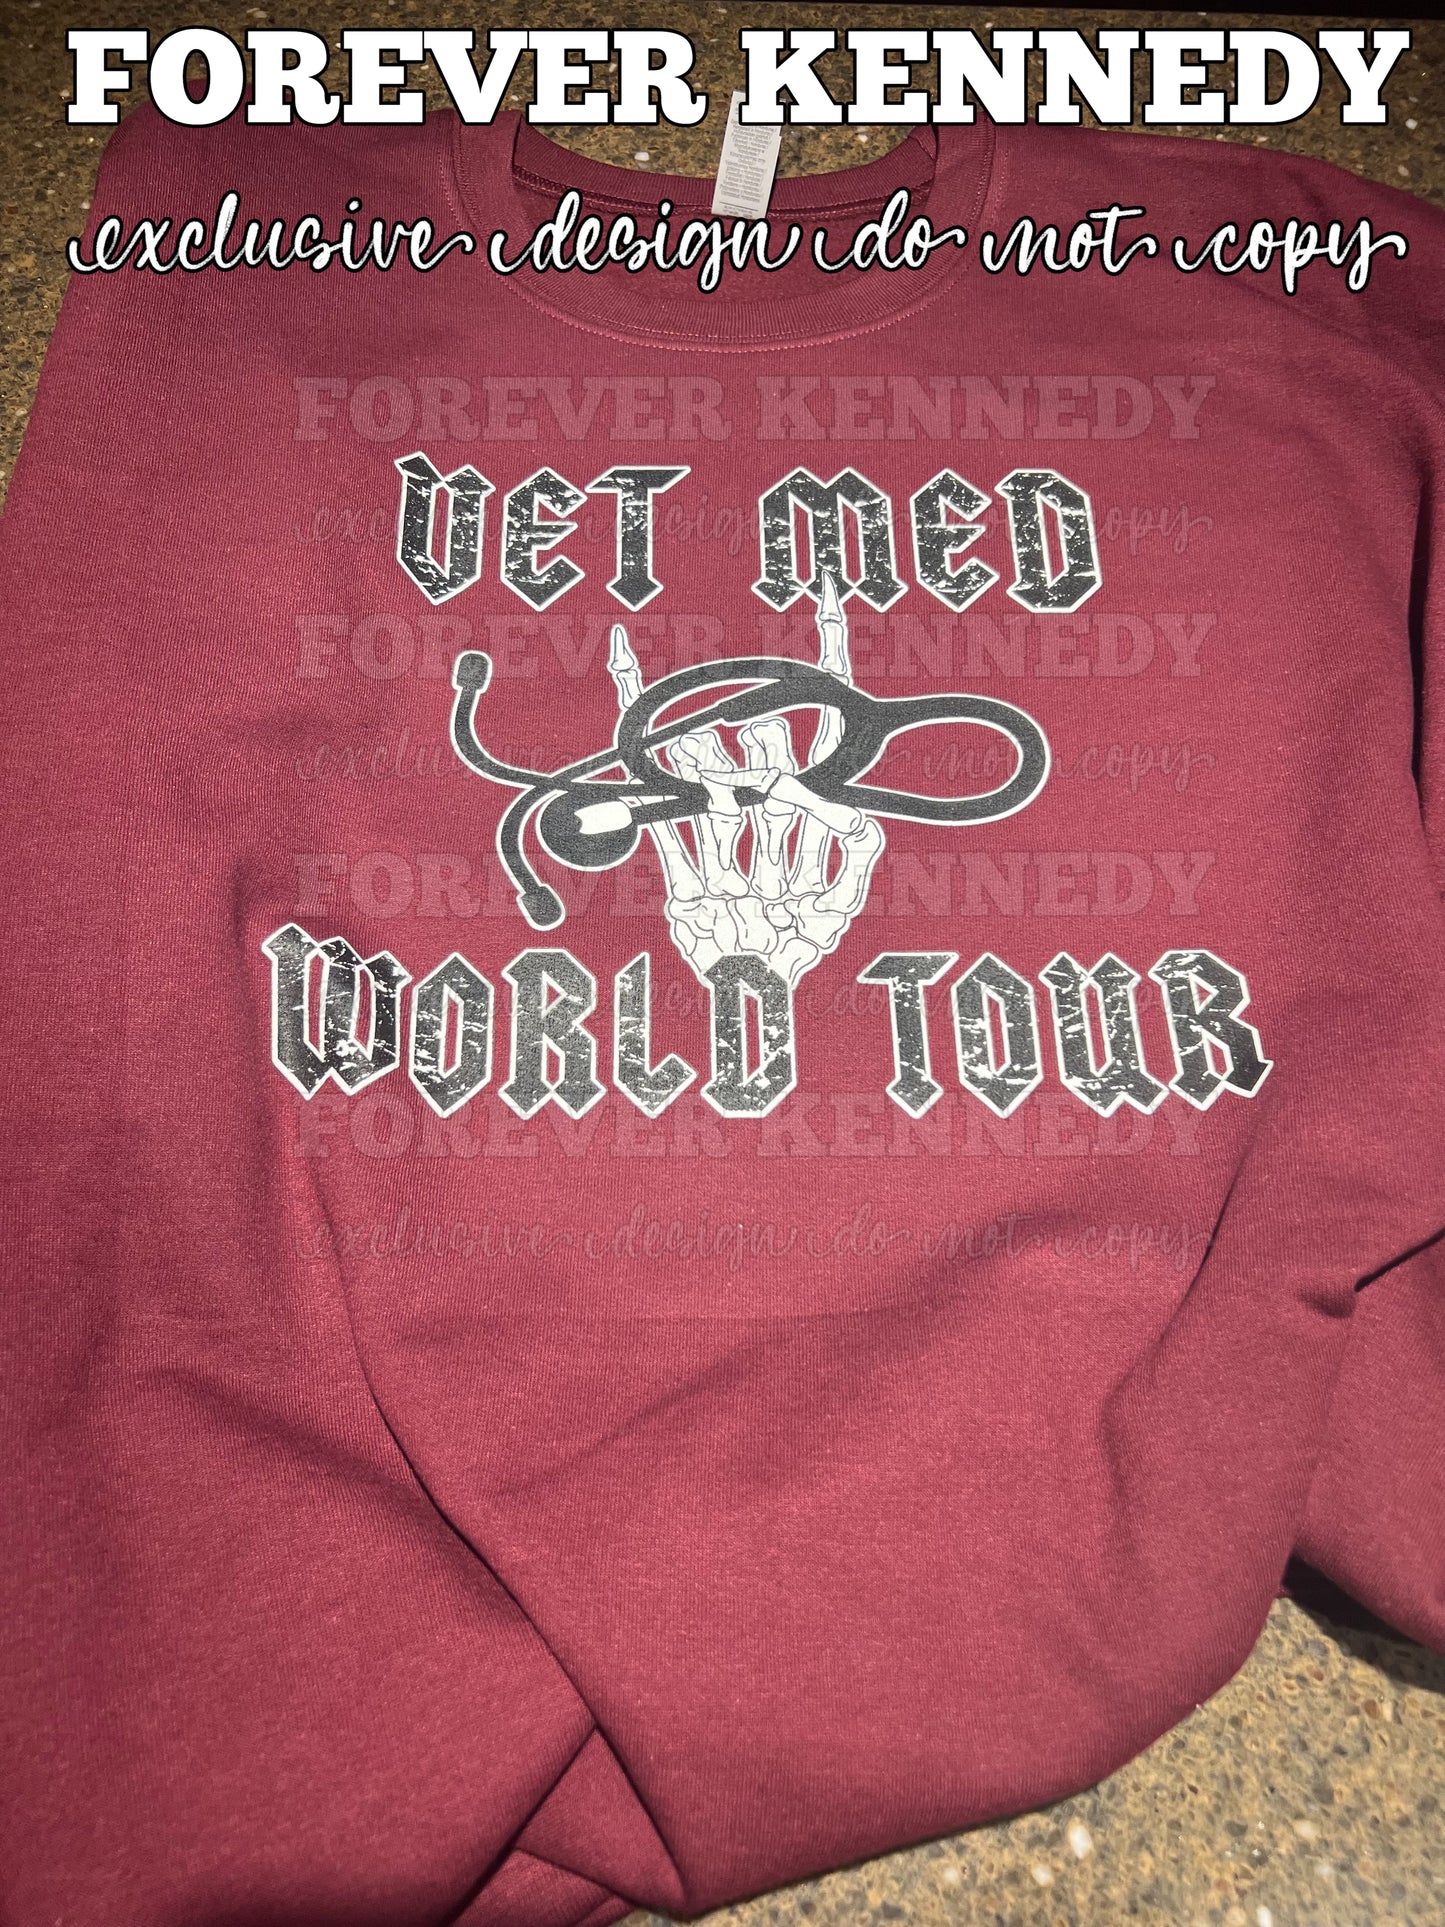 (MTO) EXCLUSIVE Pick your Apparel: Vet Med World Tour